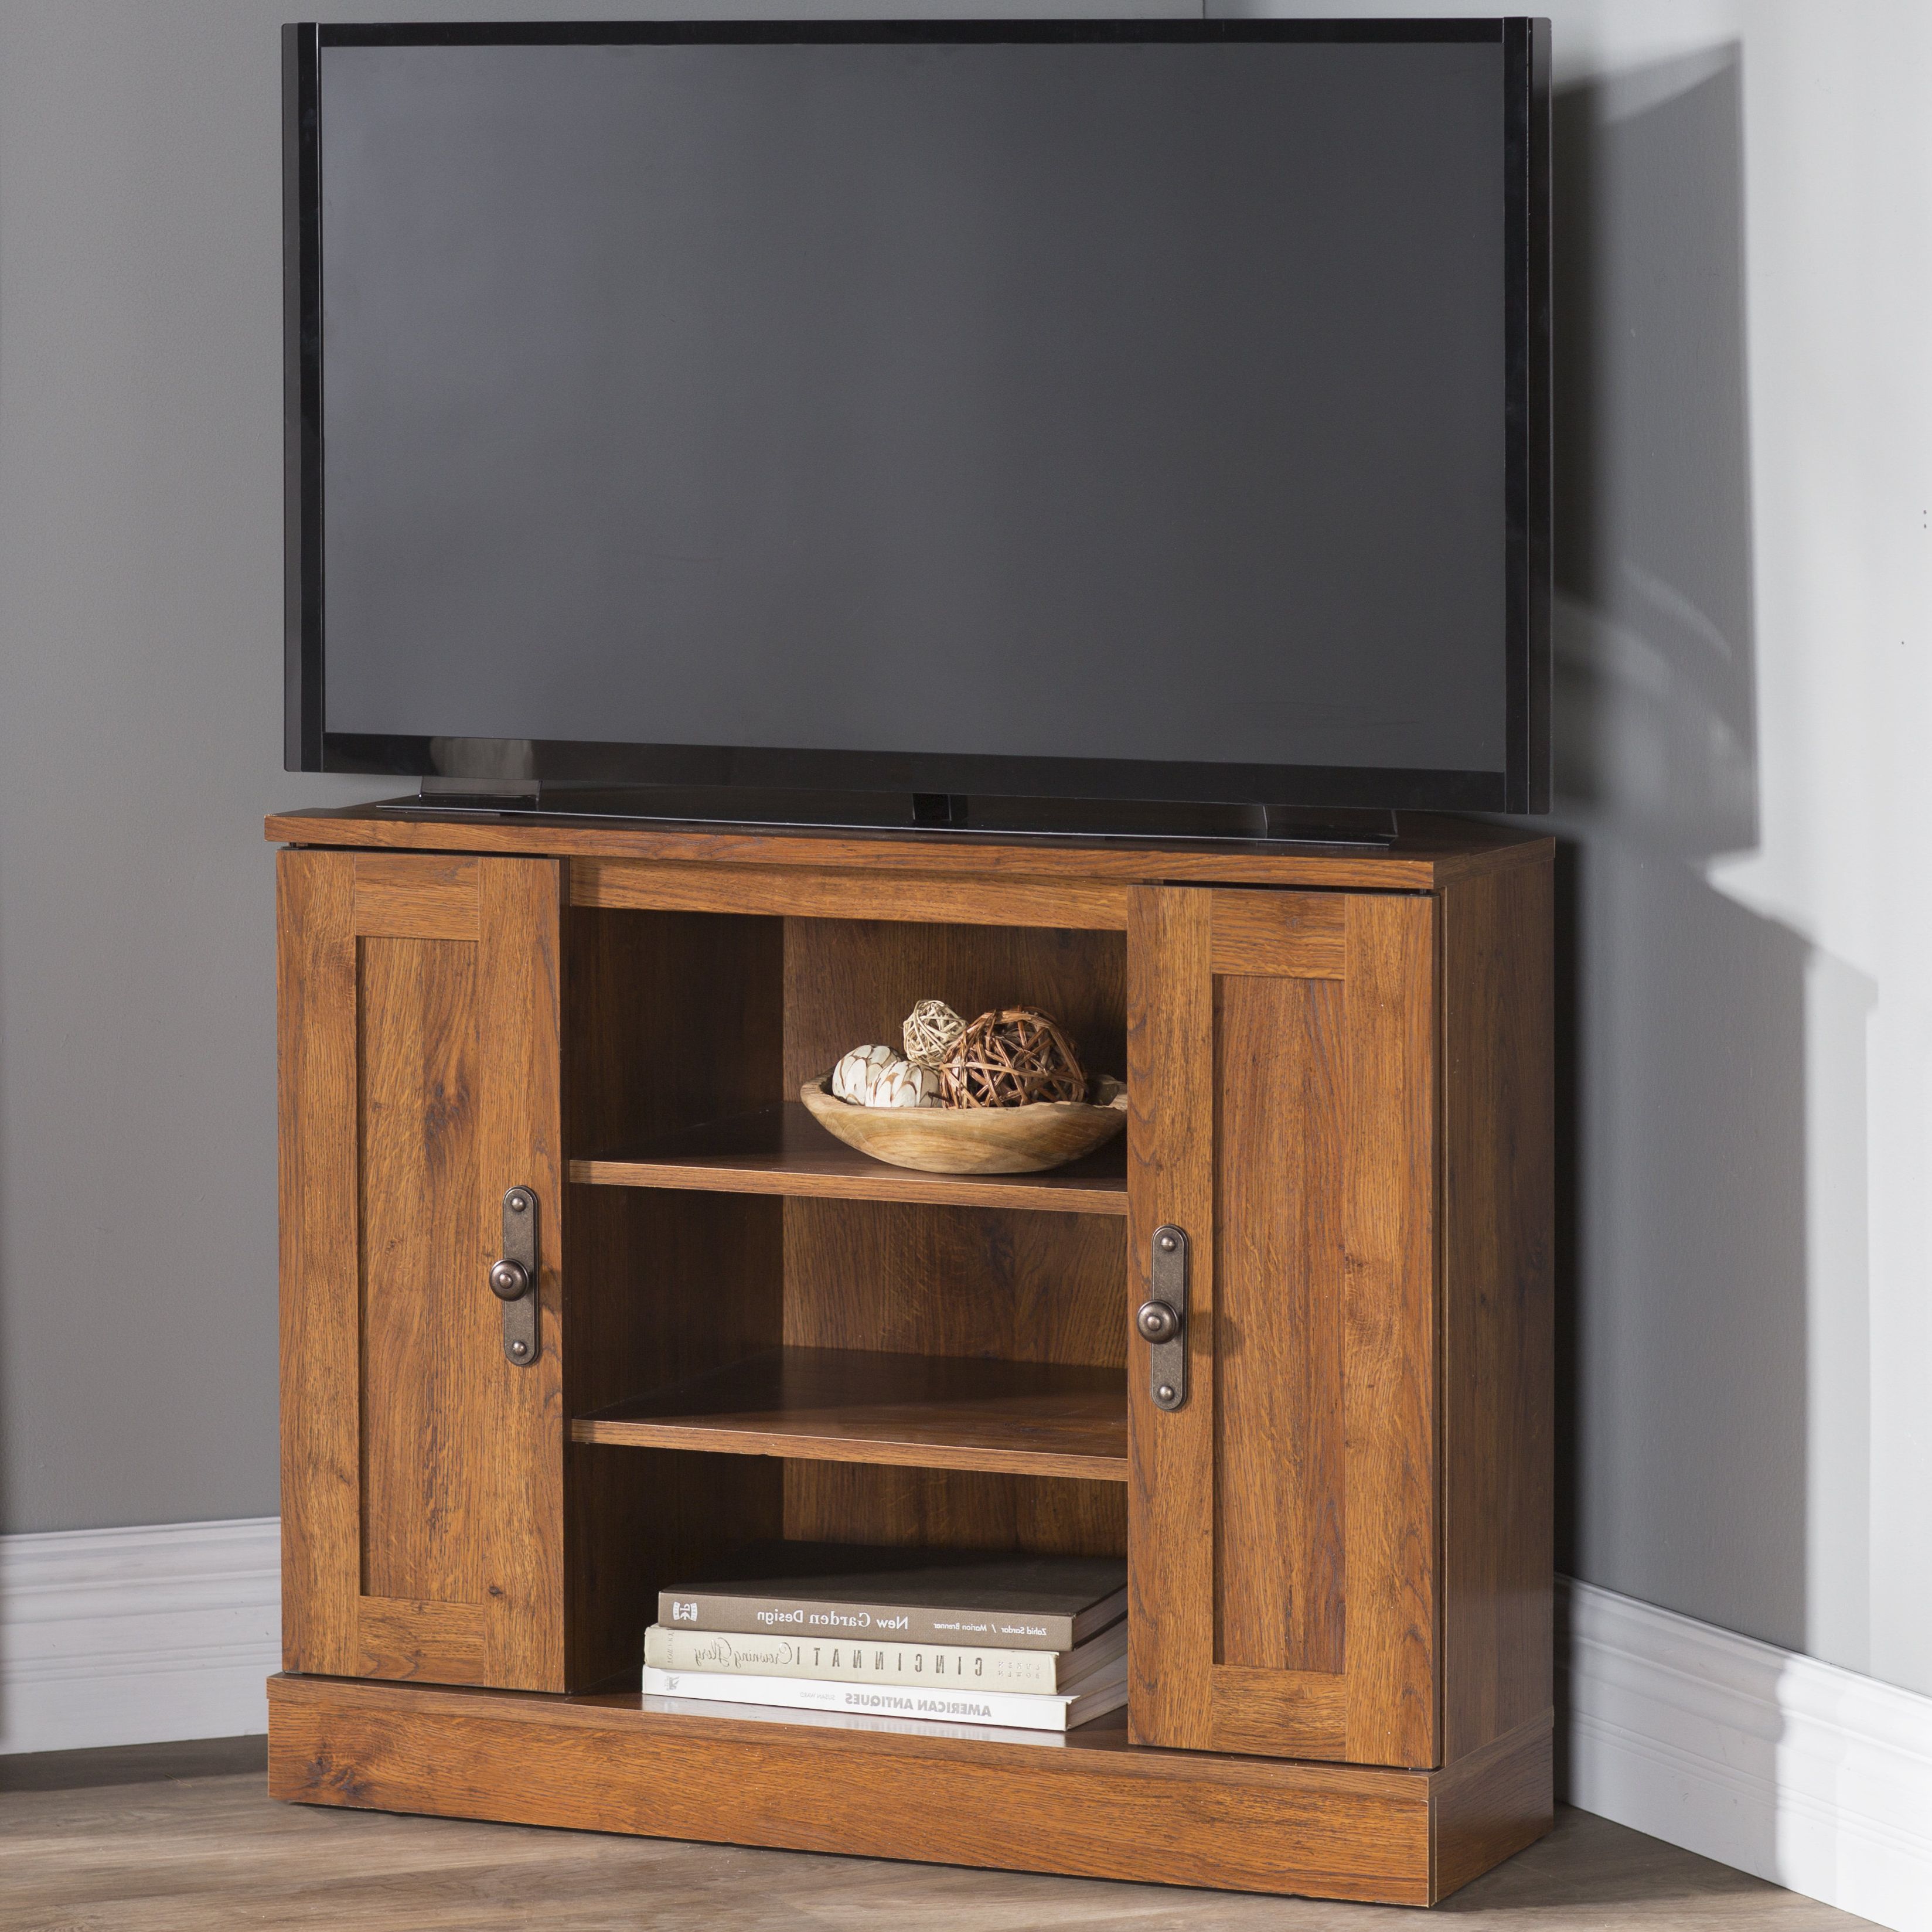 Famous 24 Inch Corner Tv Stands With Alcott Hill Englewood Corner Tv Stand For Tvs Up To 37" & Reviews (Photo 5 of 20)